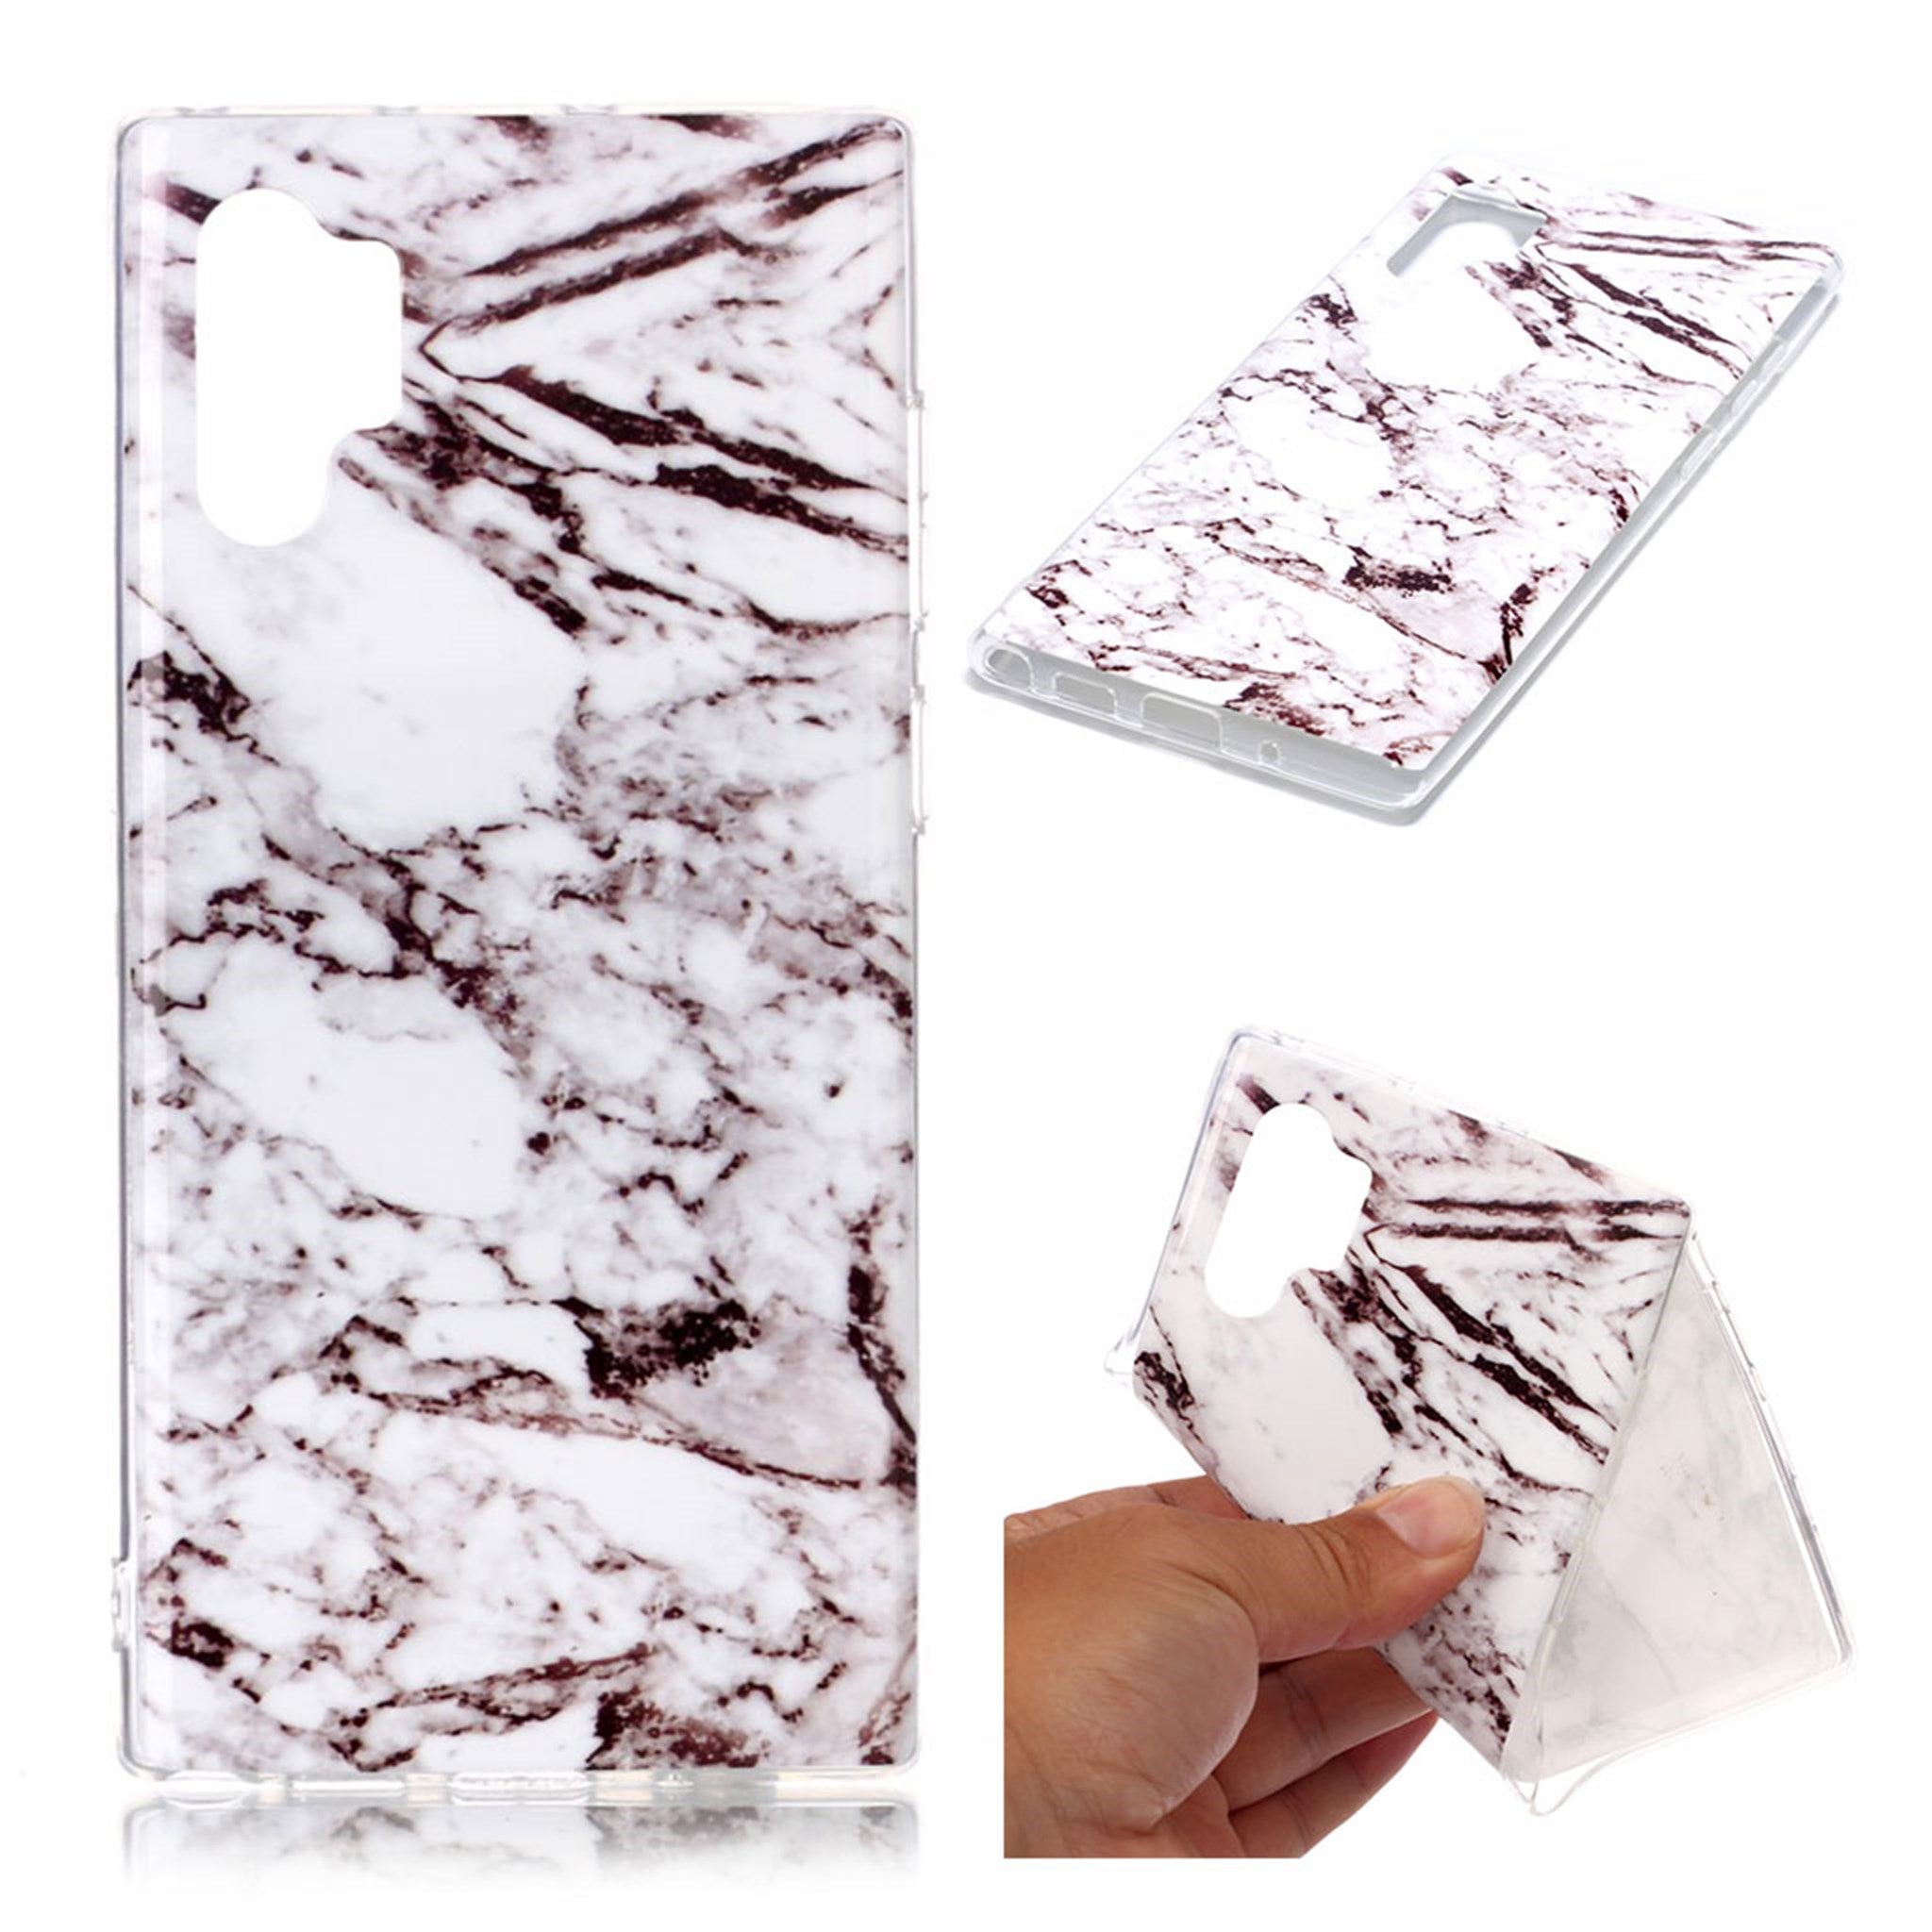 Marble Samsung Galaxy Note 10 Pro case - Grey Marble